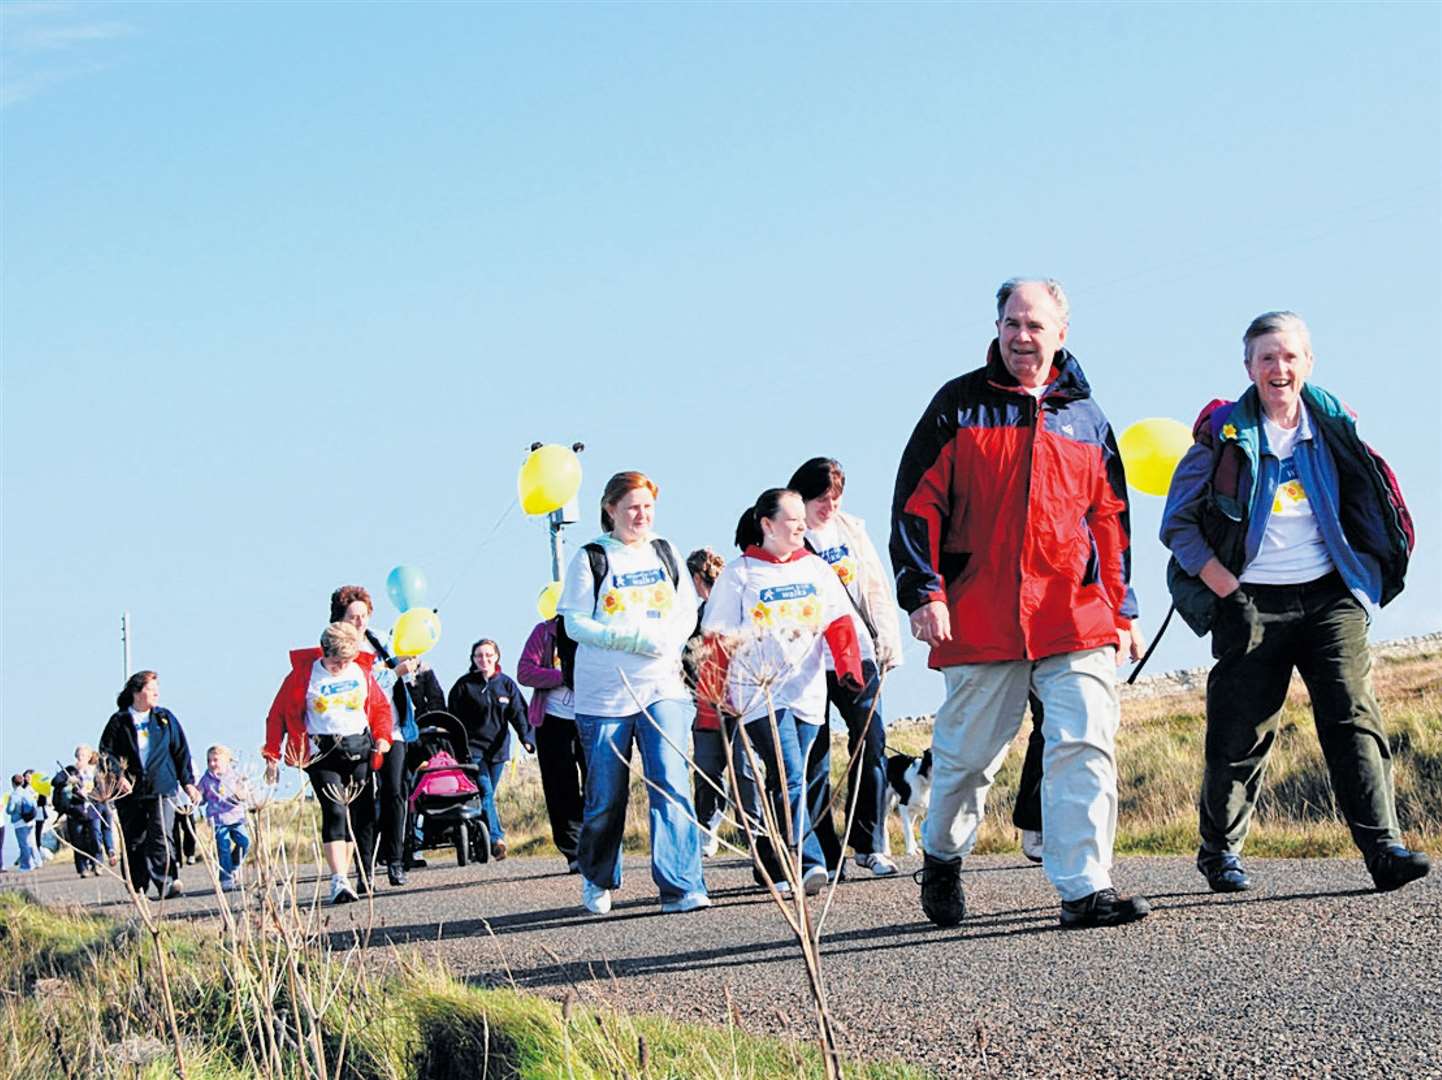 Almost 100 people took part in a Marie Curie charity walk in September 2009, covering the eight miles between Dunnet Head and the Castle of Mey. They raised £6500.